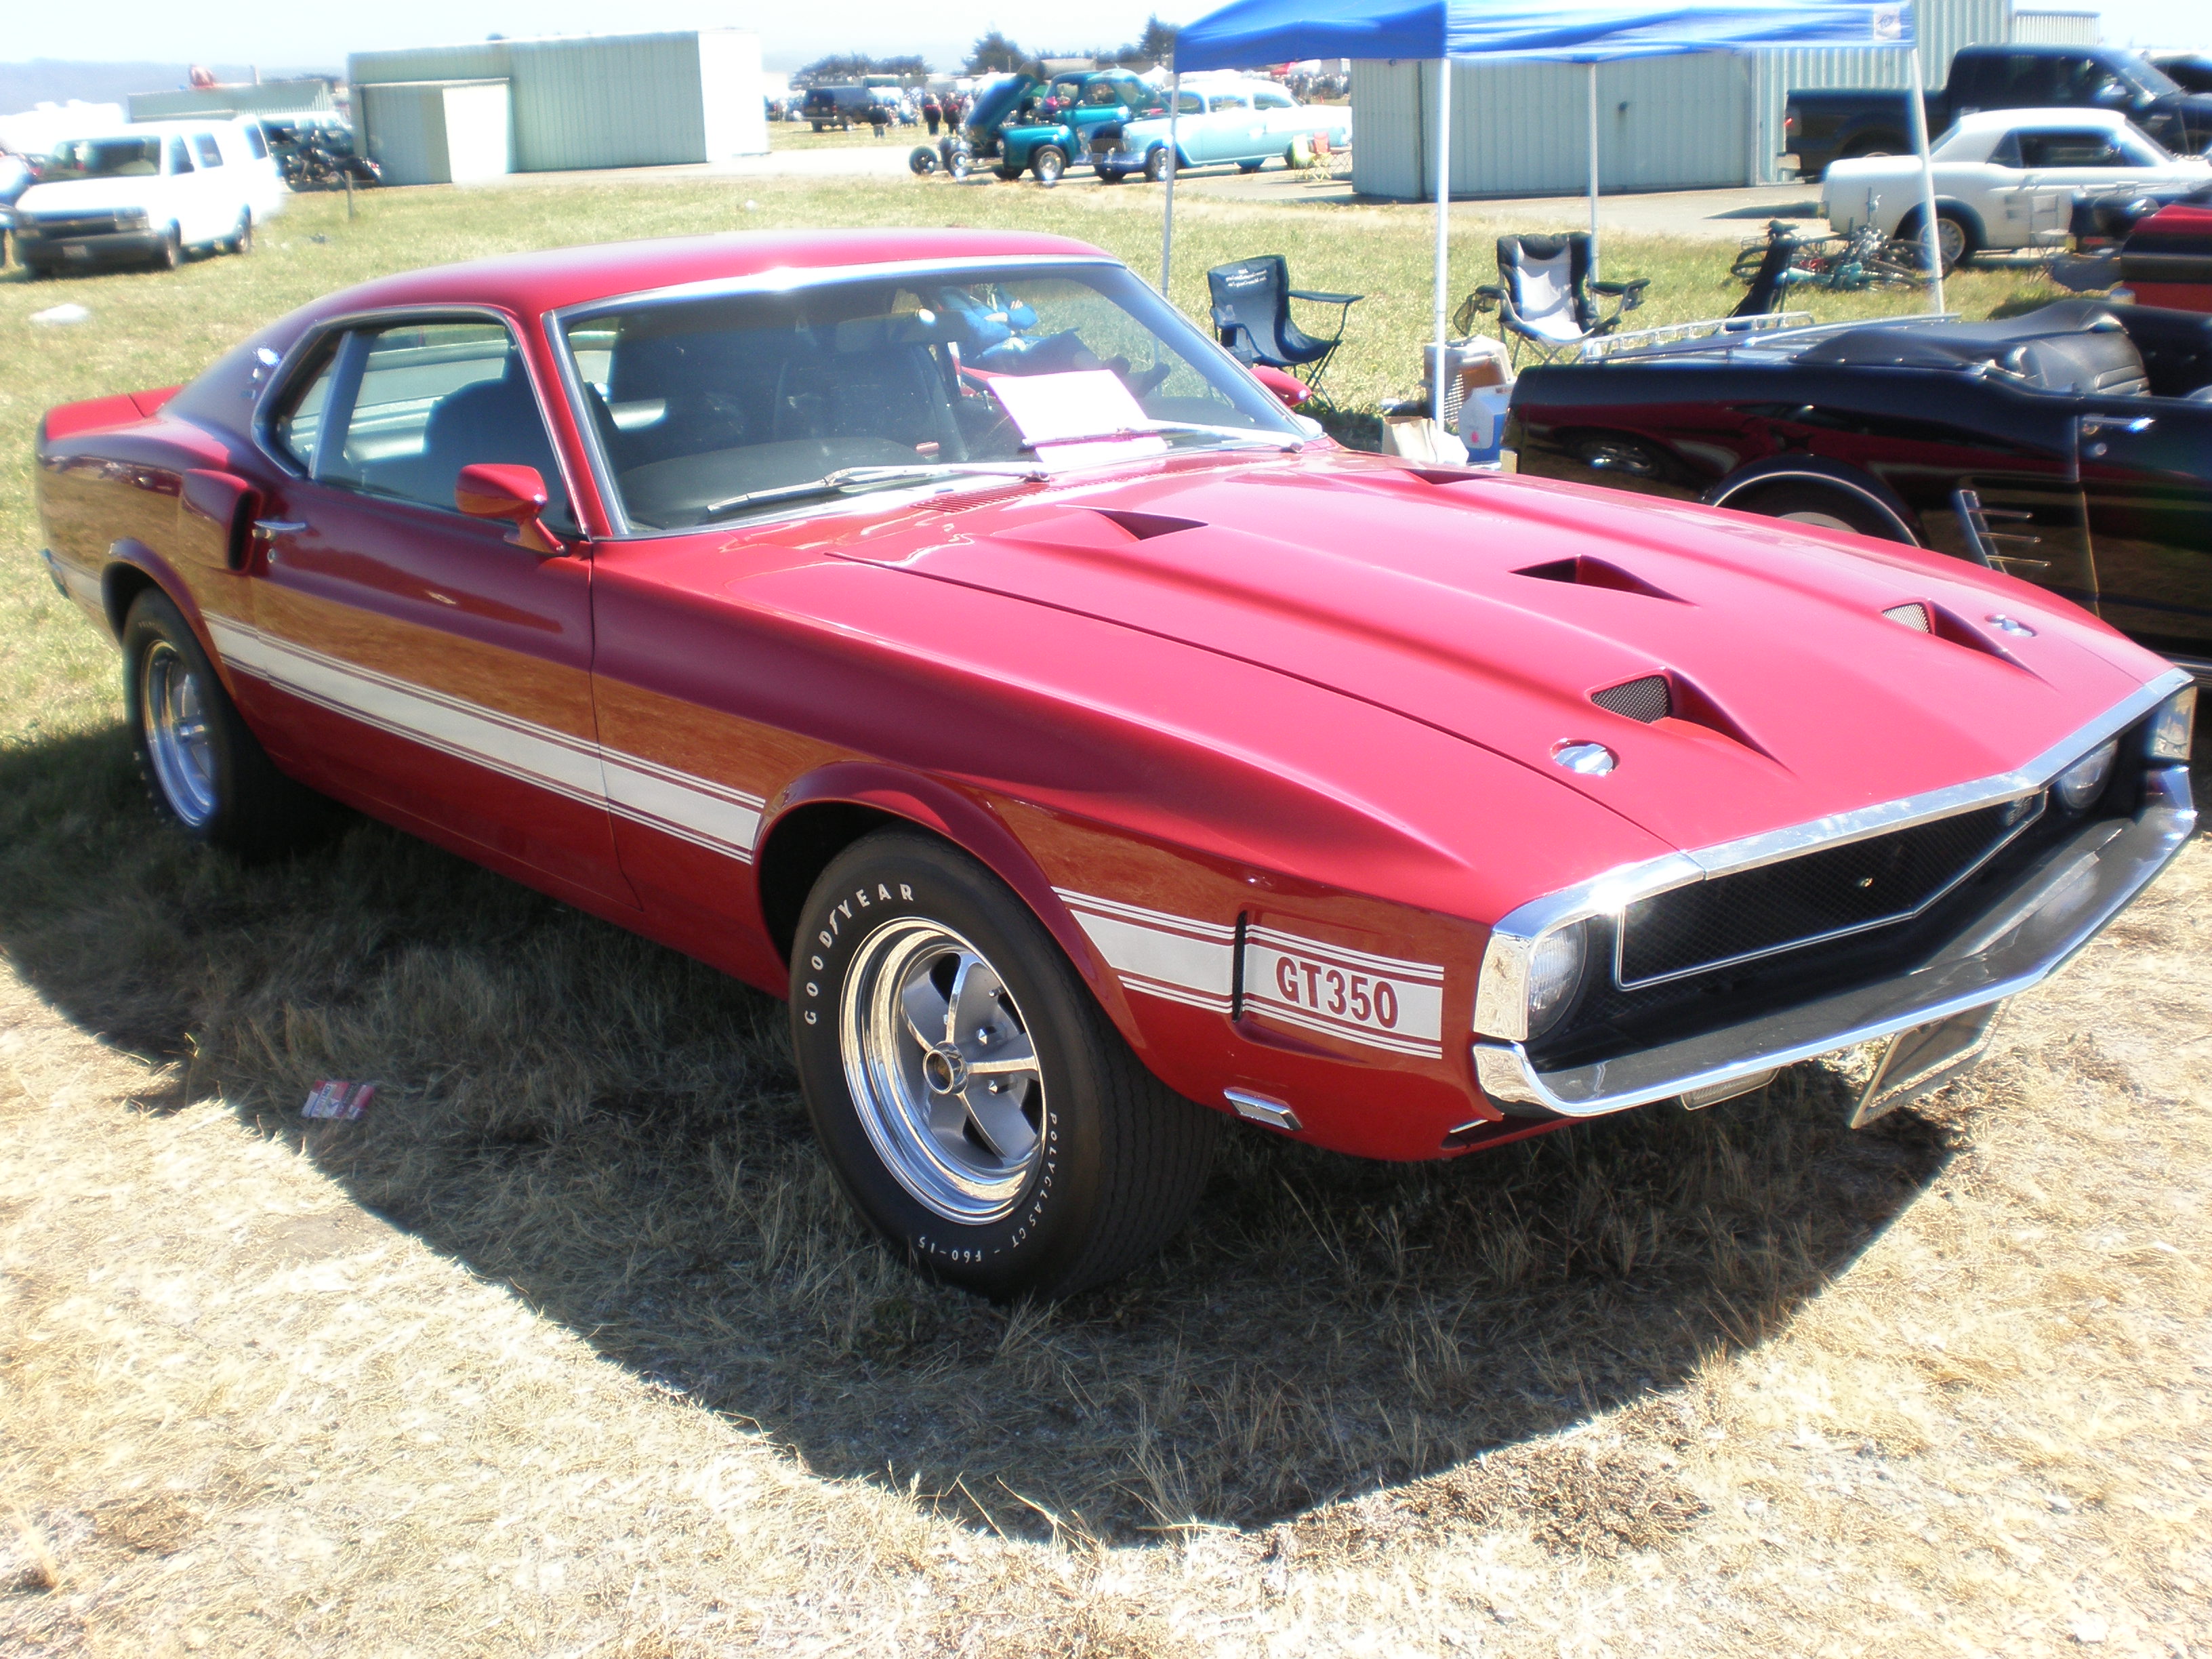 File:1969 red Shelby Mustang GT350 side.JPG - Wikimedia Commons